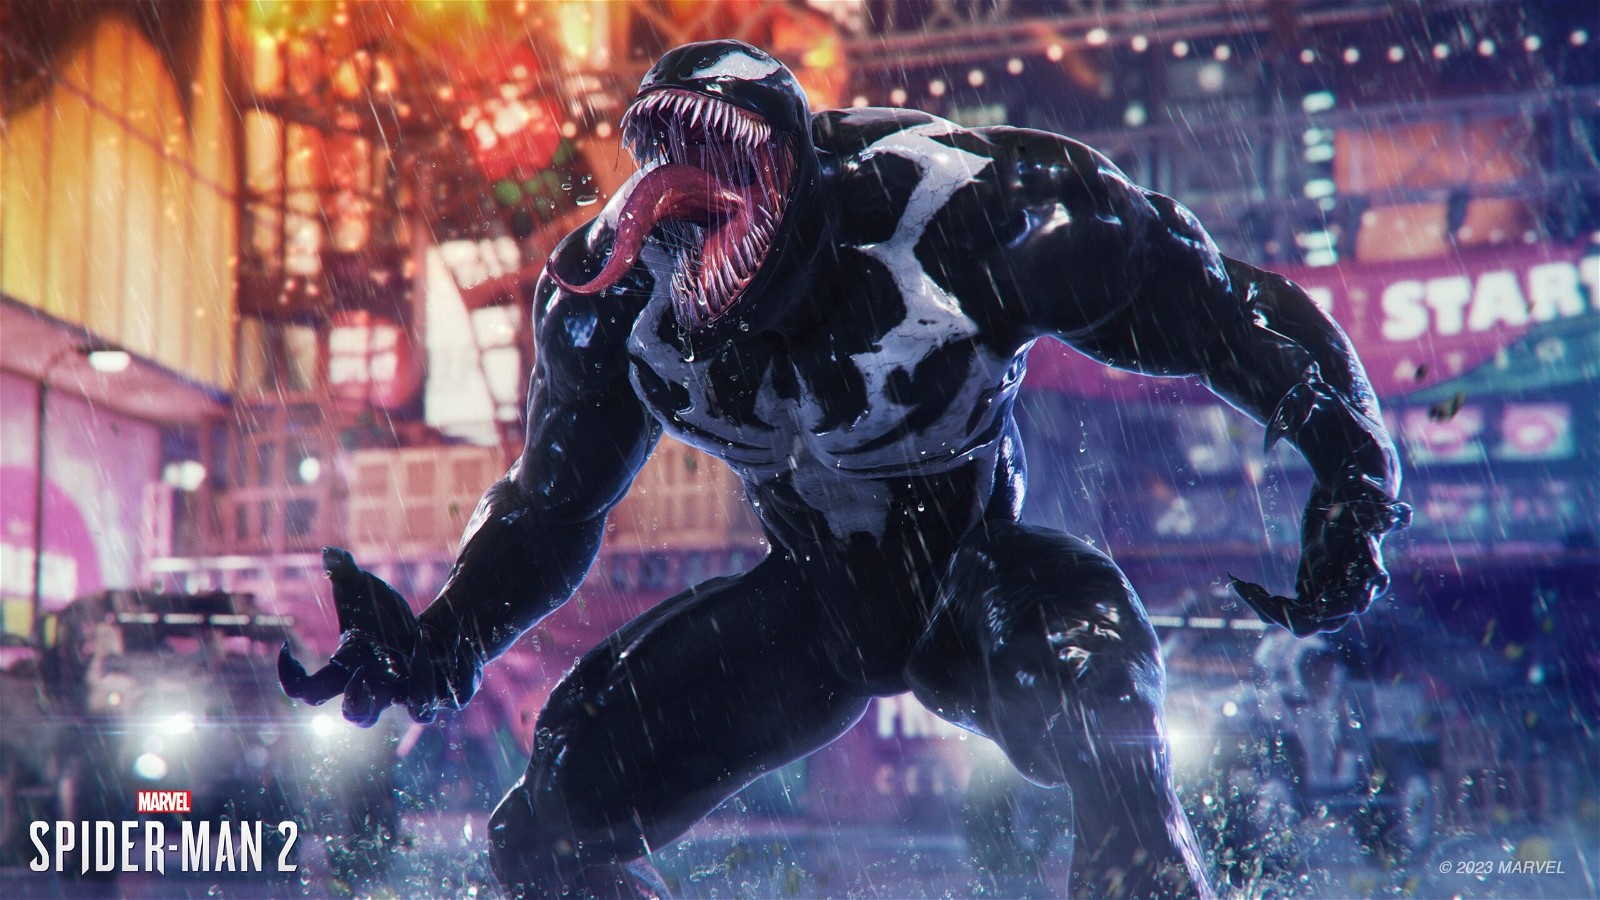 Venom, as he appears in Marvel's Spider-Man 2